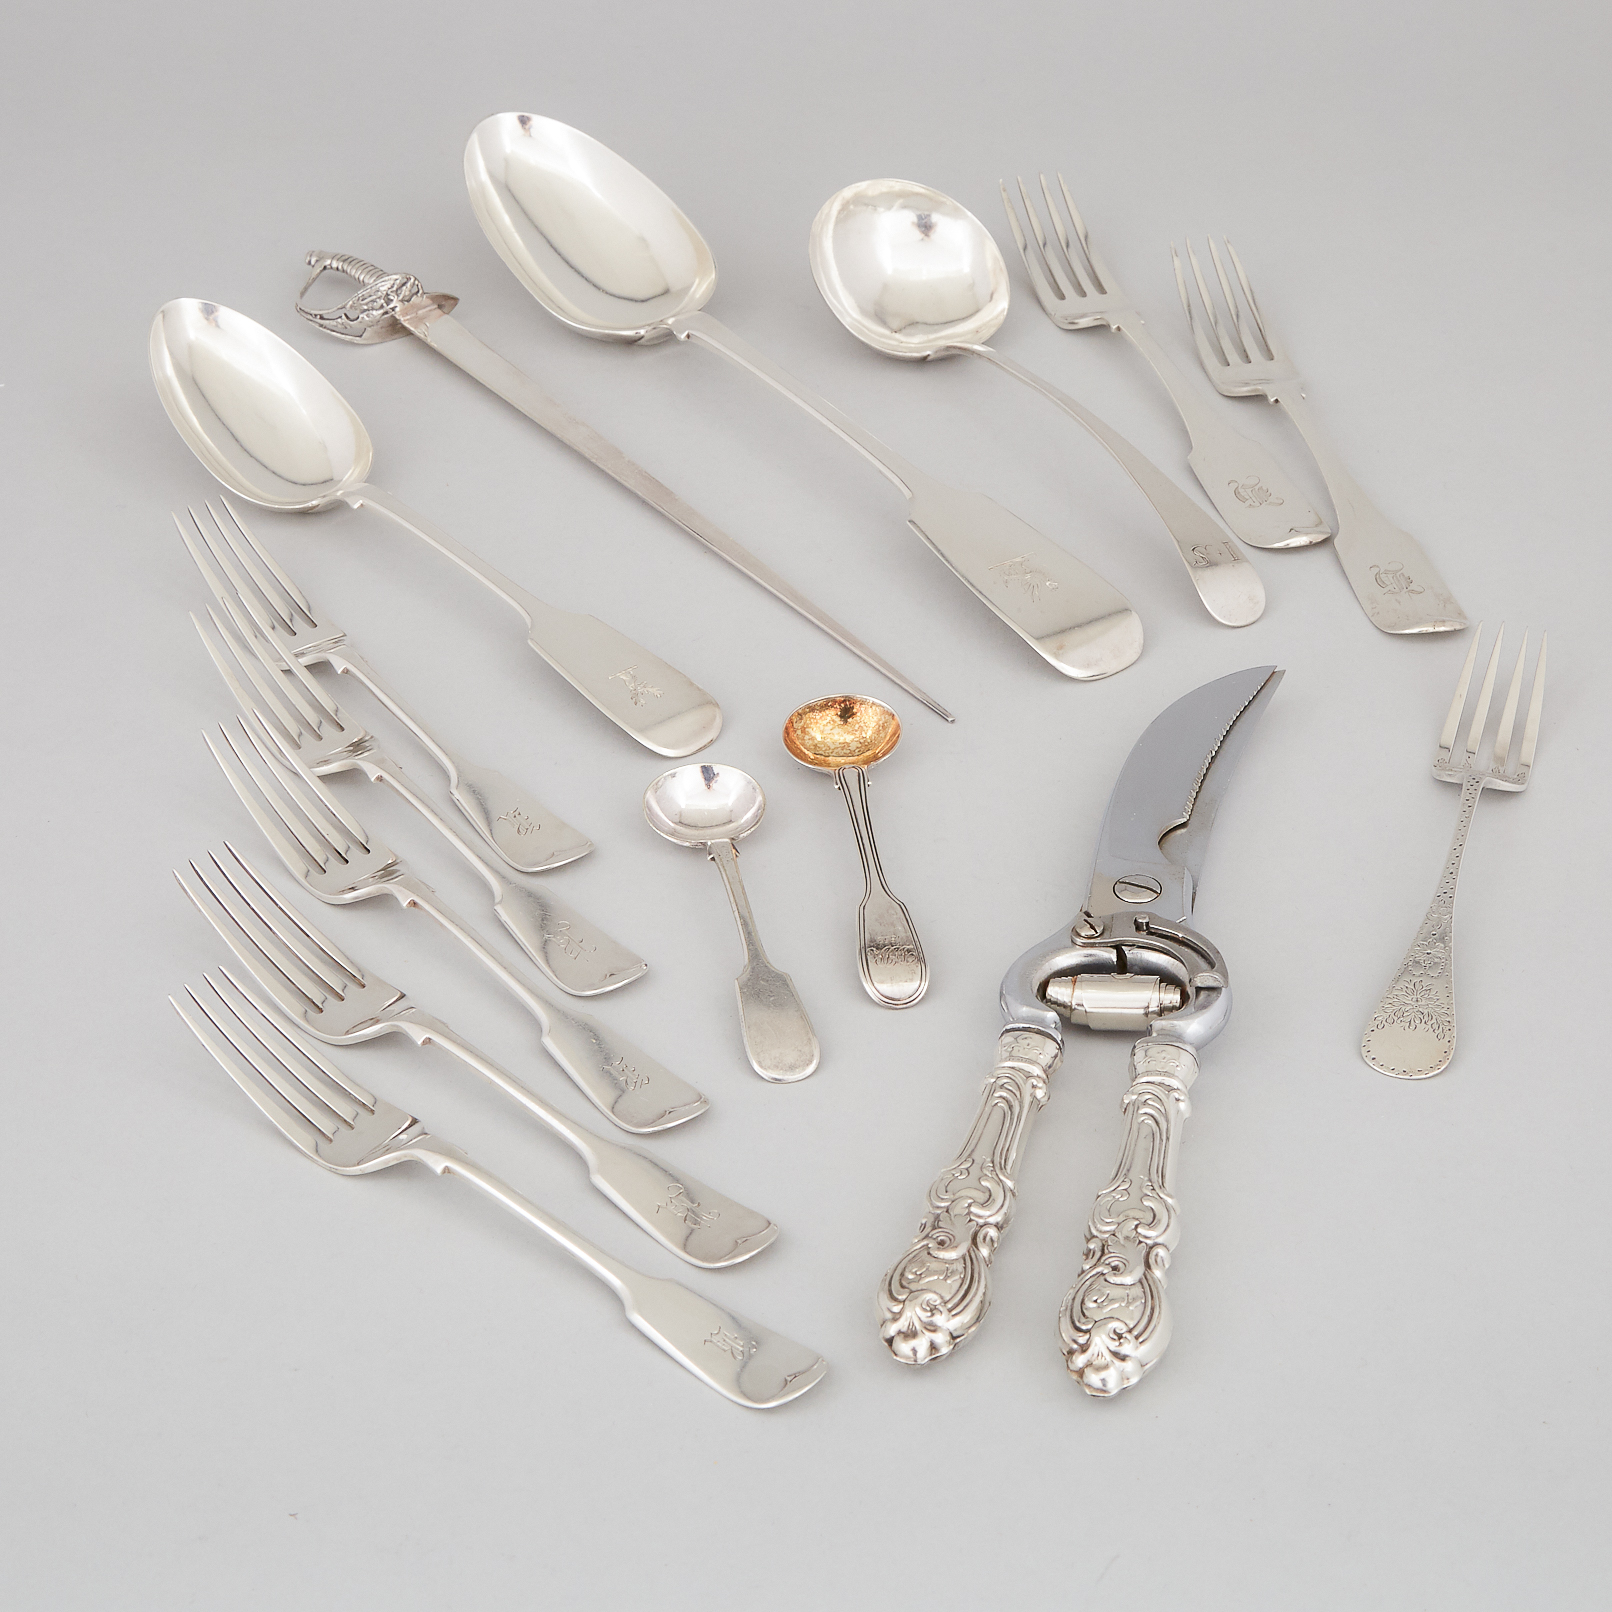 Group of English, Irish and North American Silver Flatware, 19th/20th century